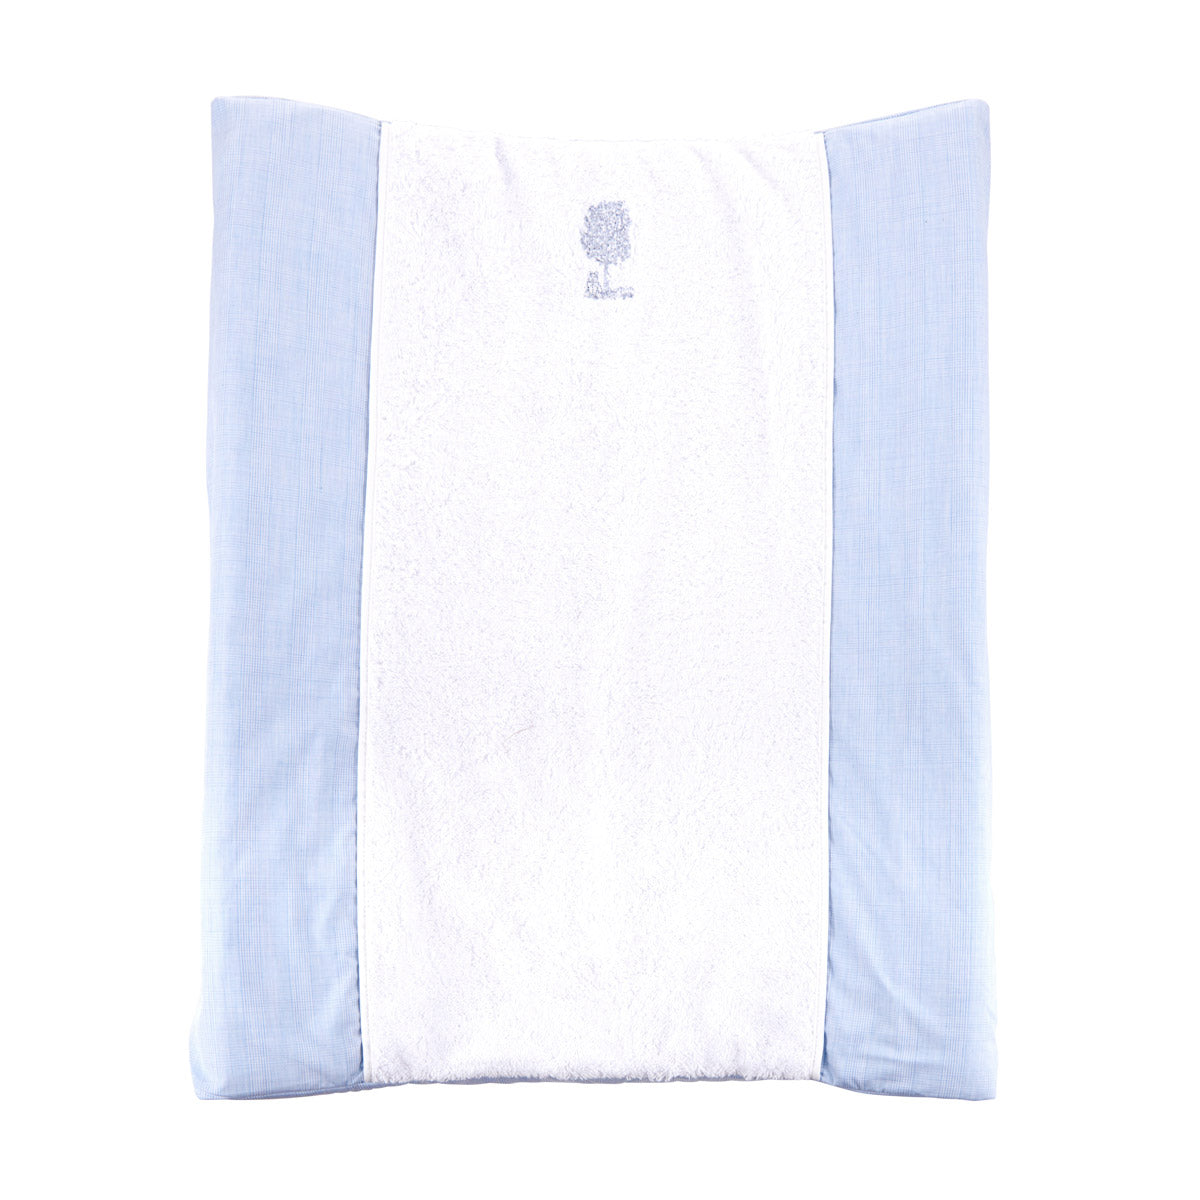 Theophile & Patachou Cover for Changing Mat in Terry Cloth / Jersey - Sweet Blue